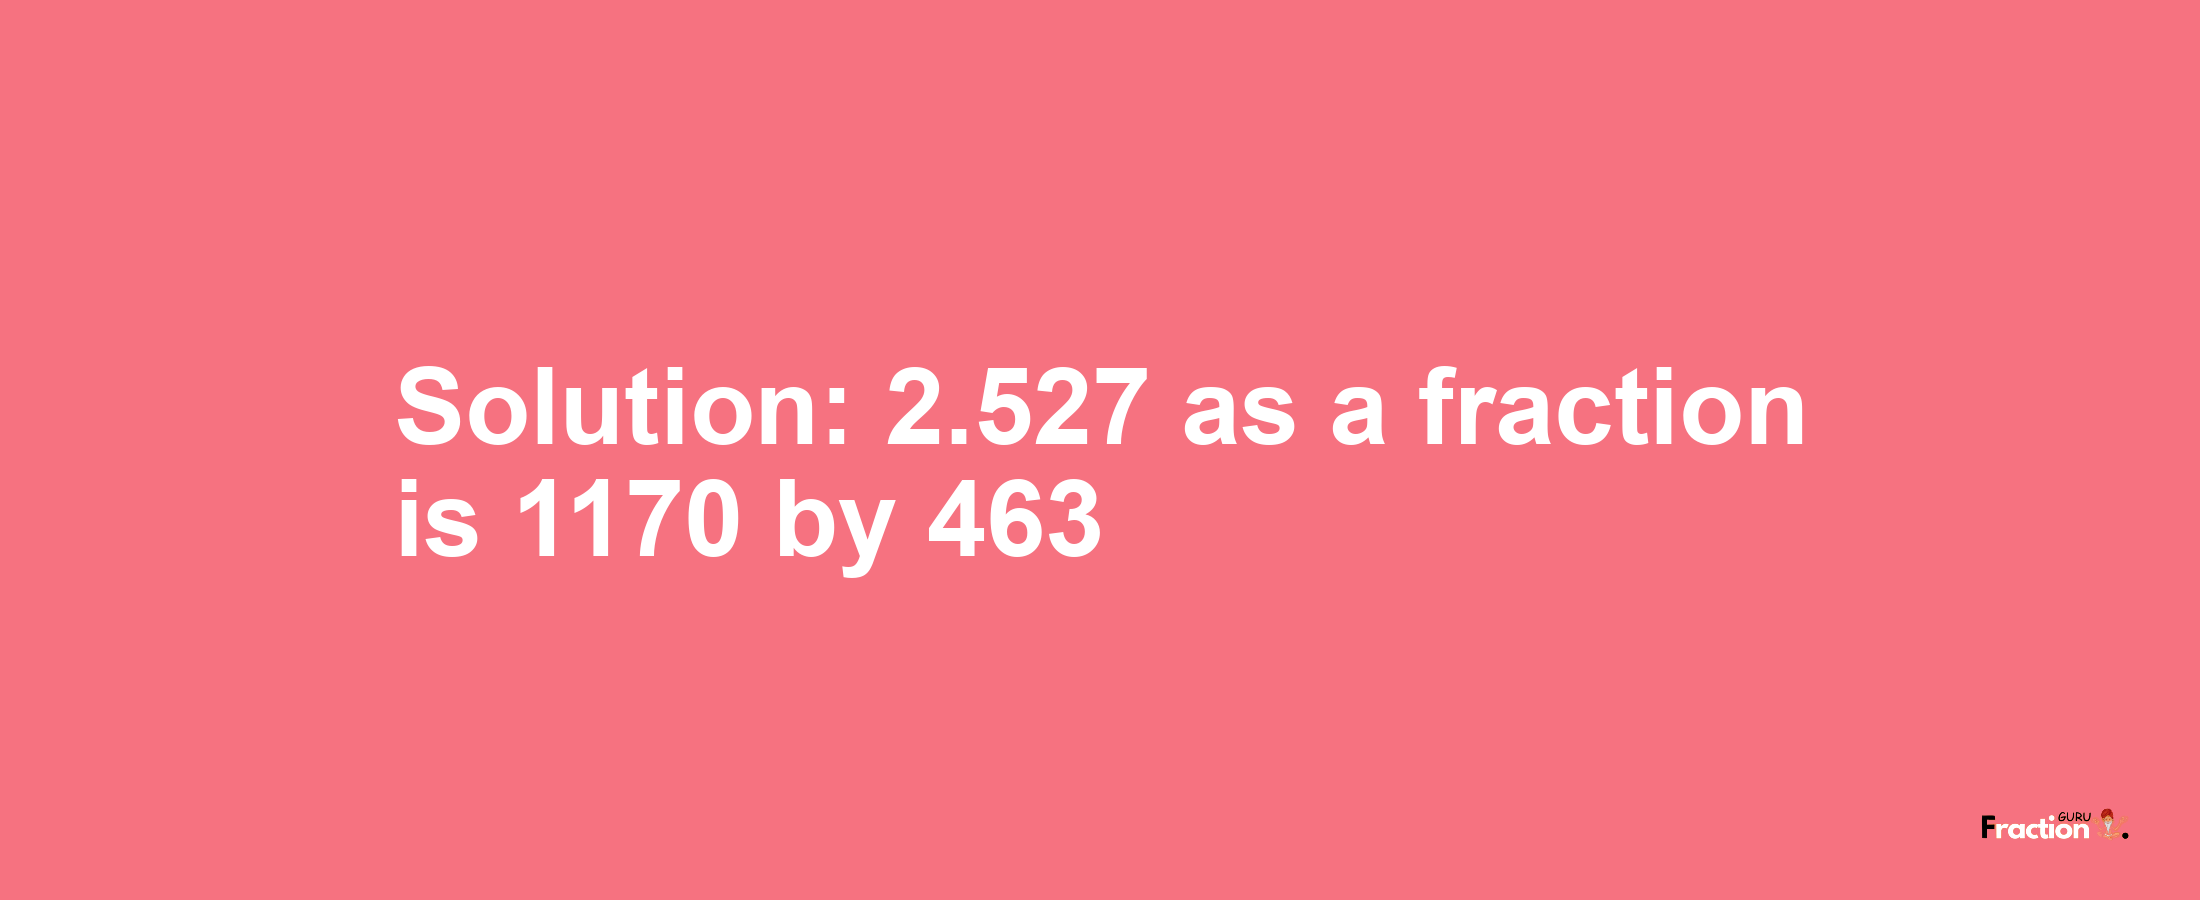 Solution:2.527 as a fraction is 1170/463